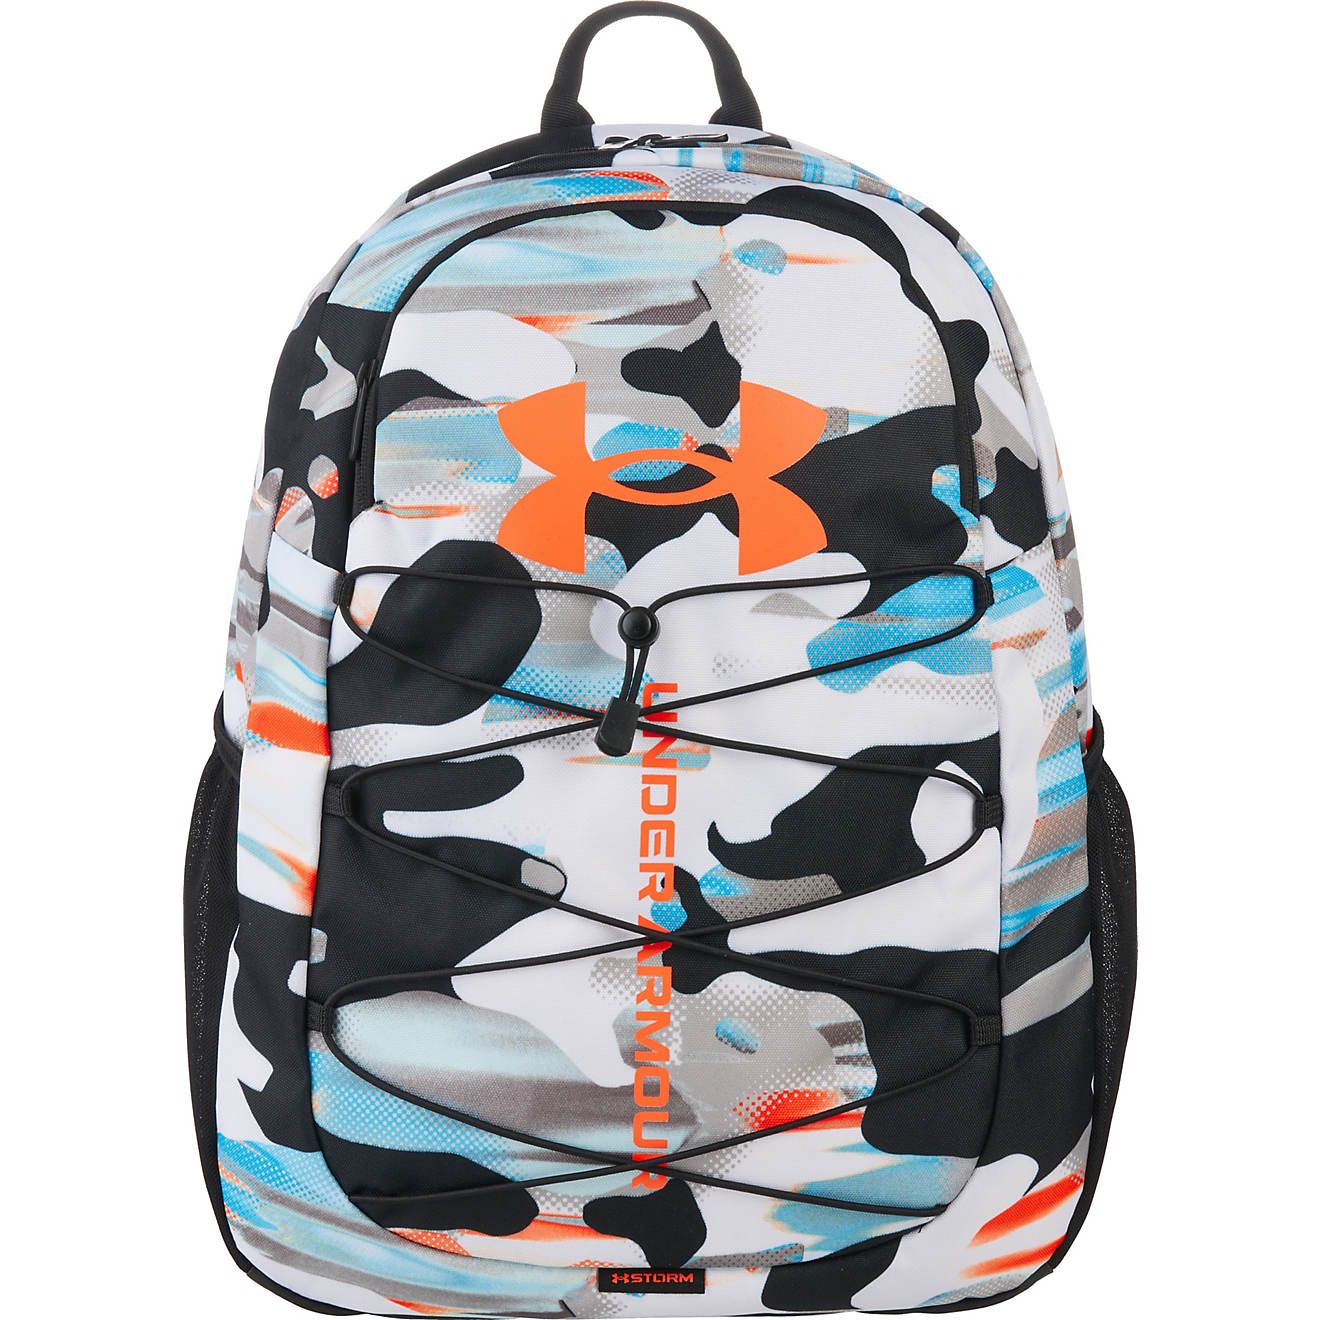 Under Armour Hustle Sport Backpack | Academy | Academy Sports + Outdoors